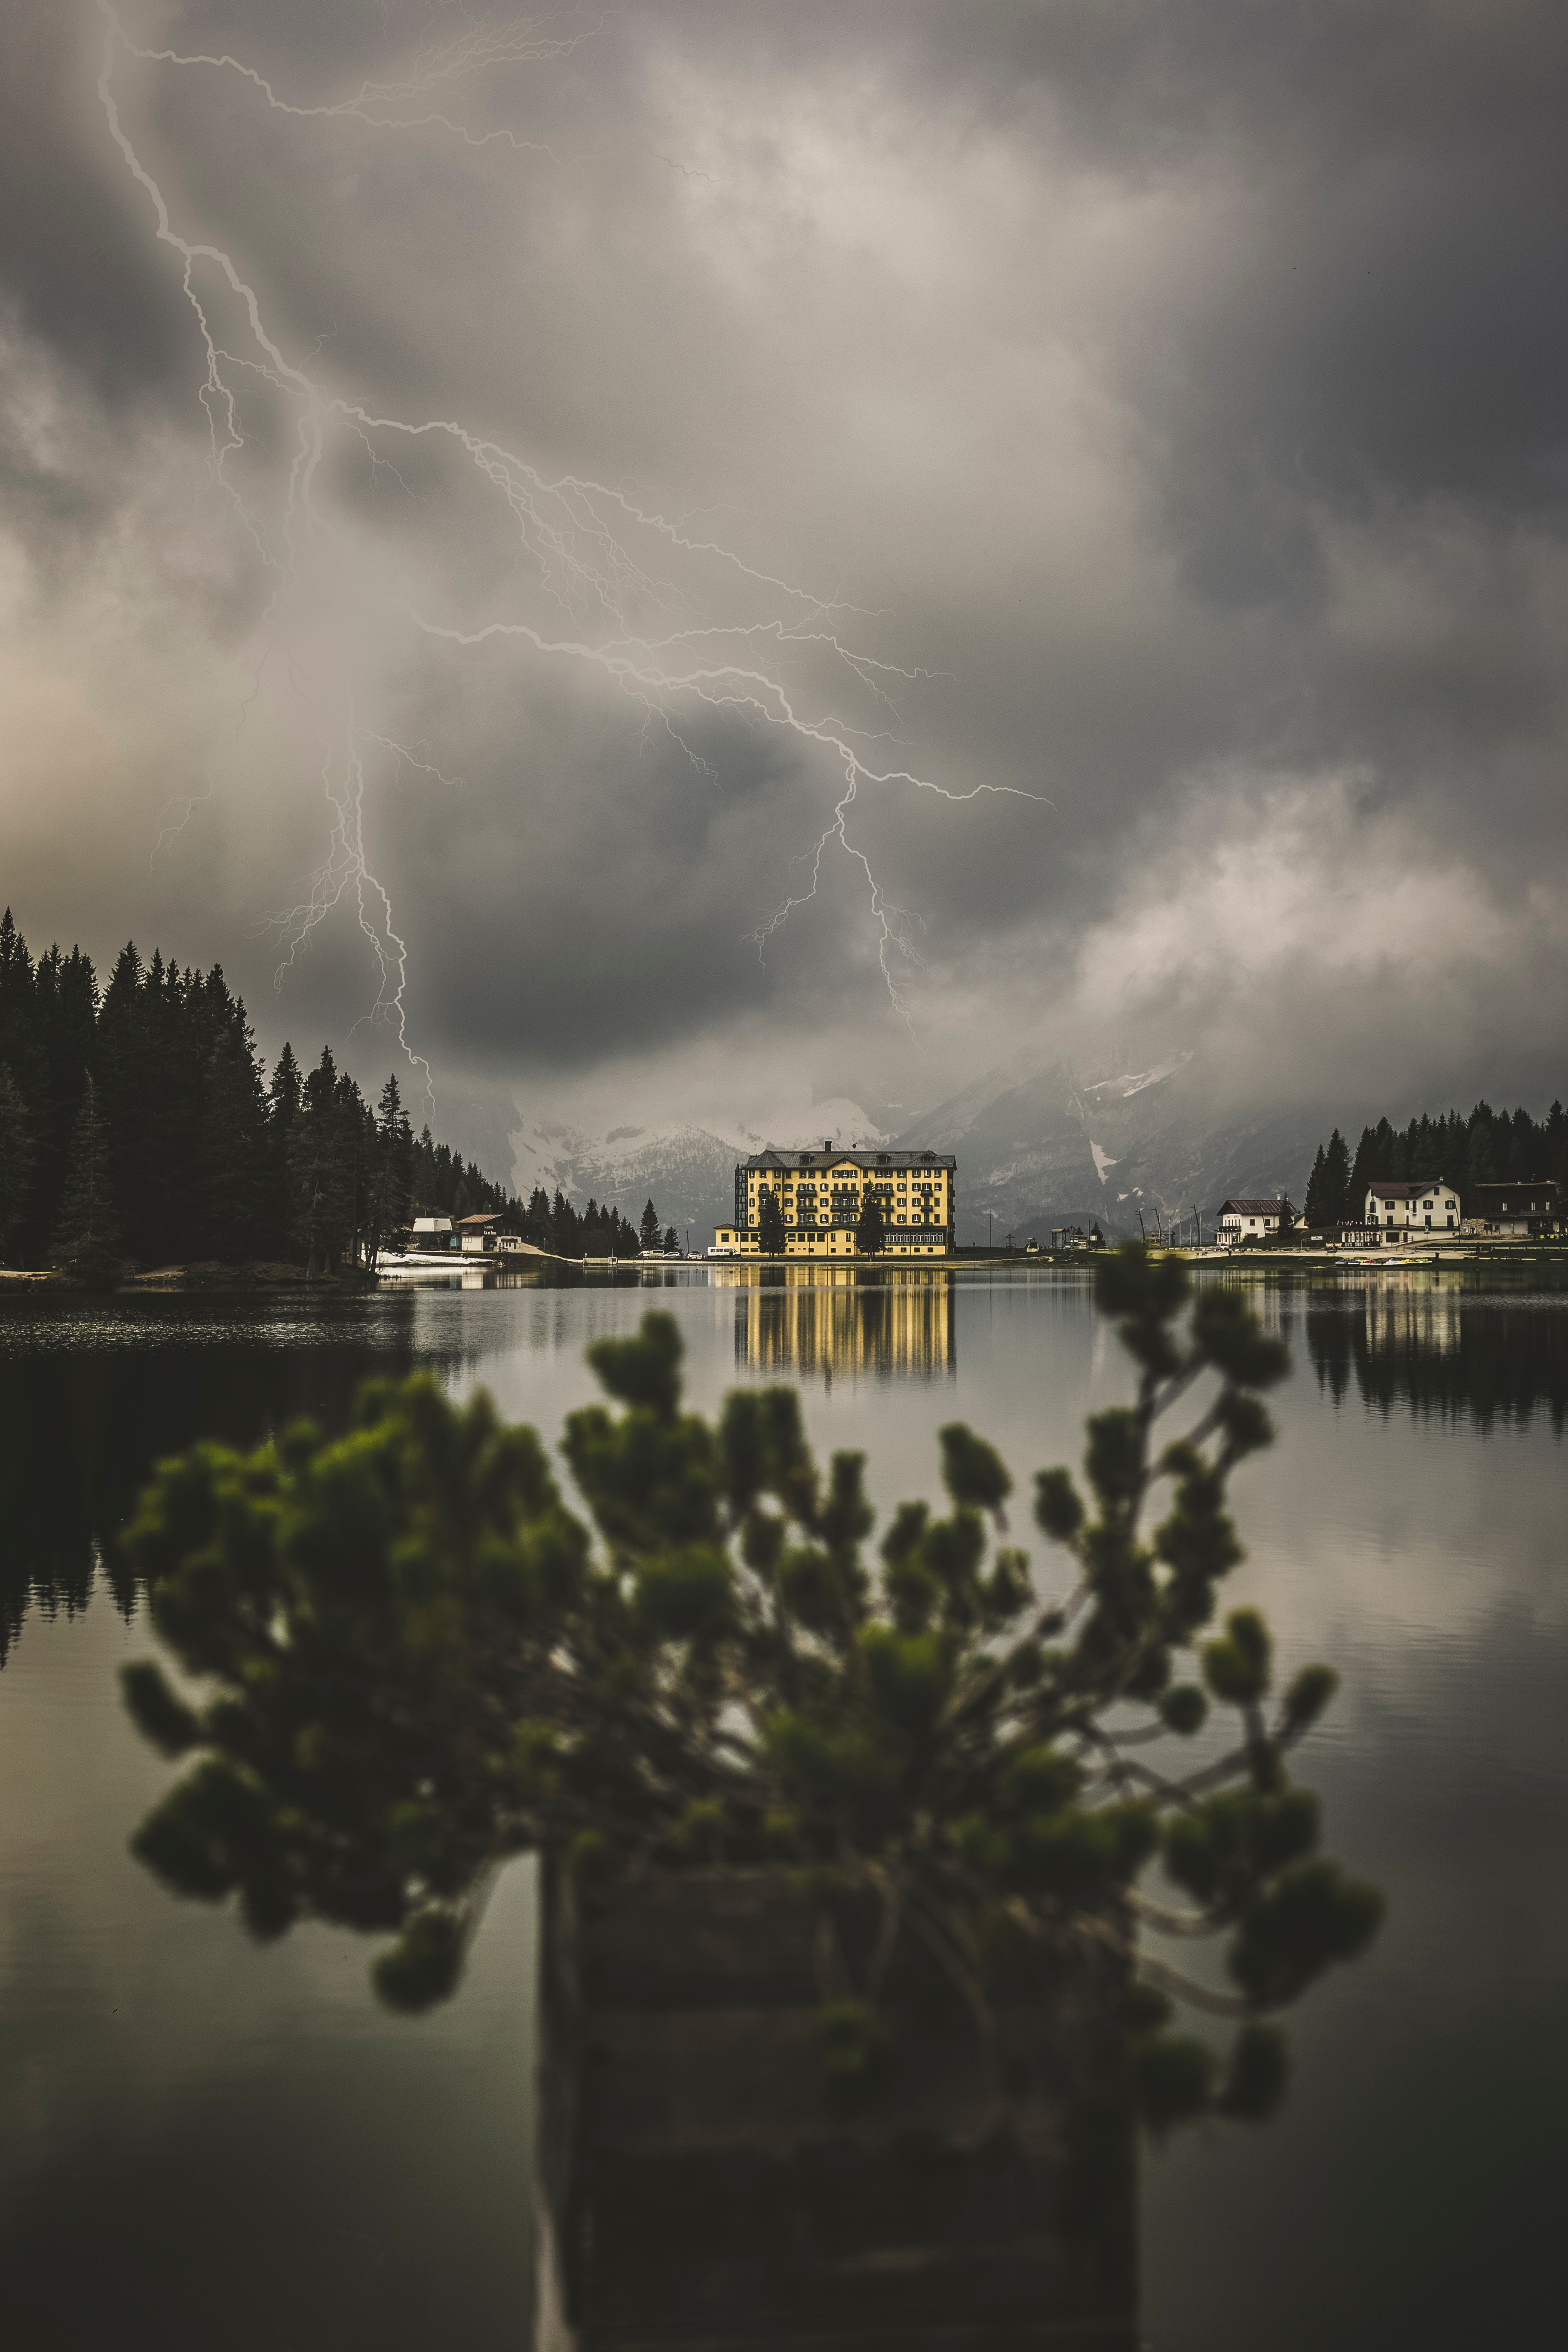 thunderstorm, lightning, nature, mountains, building, lake, storm cell phone wallpapers